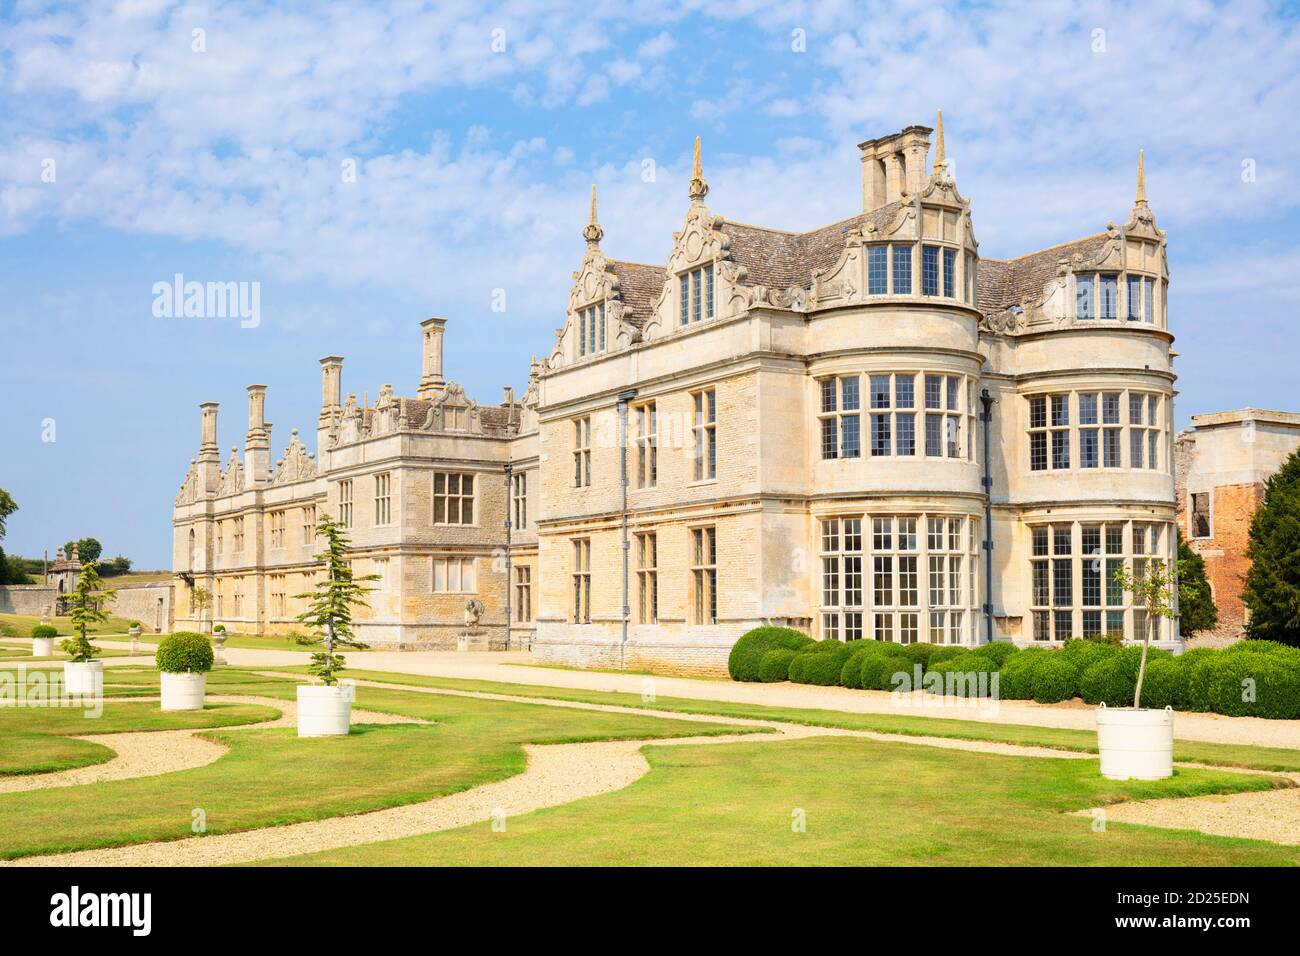 Kirby Hall a ruined 17th century Elizabethan stately home or country house near Gretton nr Corby Northamptonshire England UK GB Europe Stock Photo